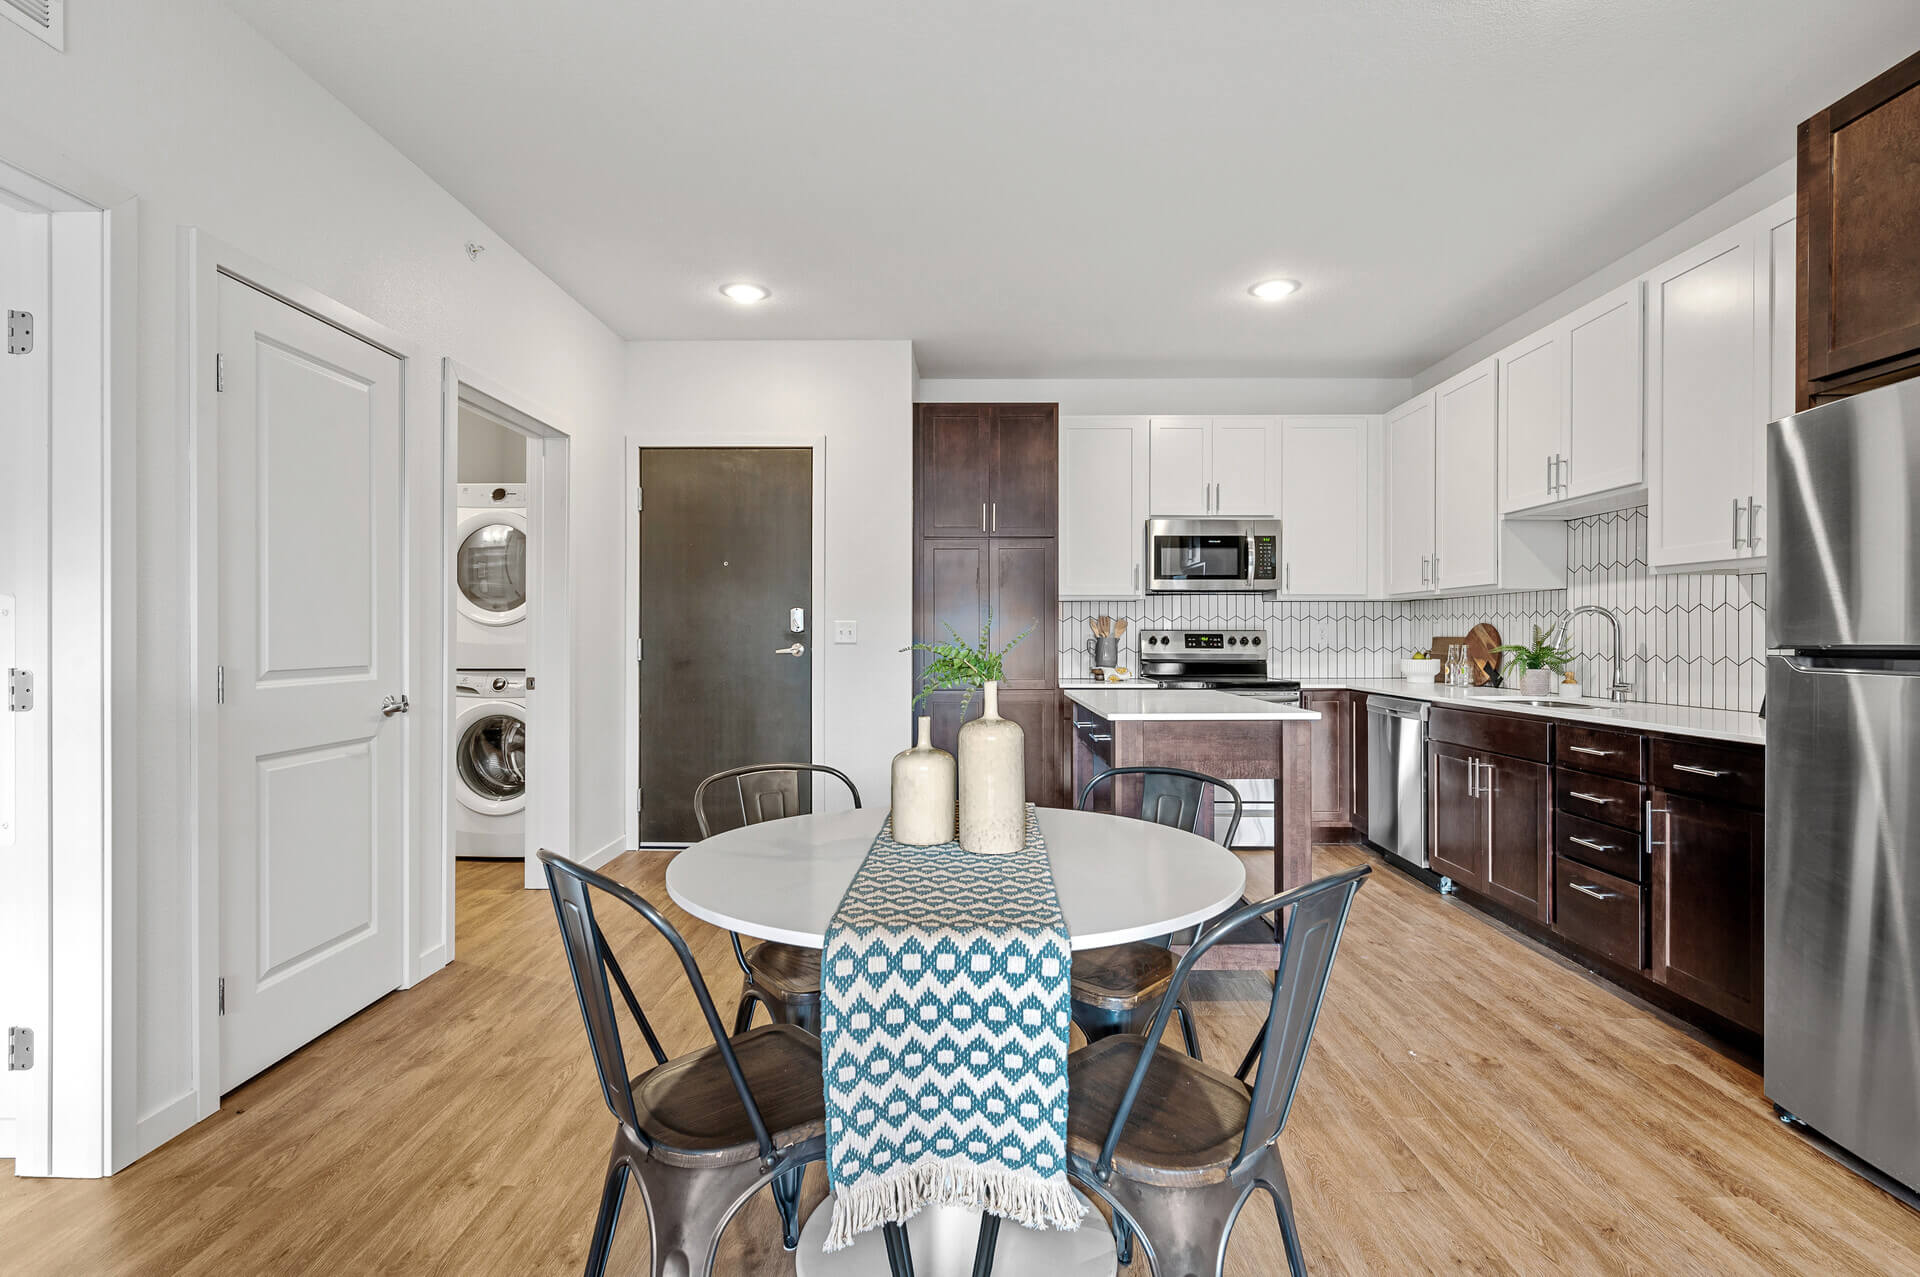 Open-plan apartment interior showing a dining area with a white round table and metal chairs, adjacent to a kitchen with white upper cabinets, dark brown lower cabinets, stainless steel appliances, and a laundry closet with a washer and dryer.